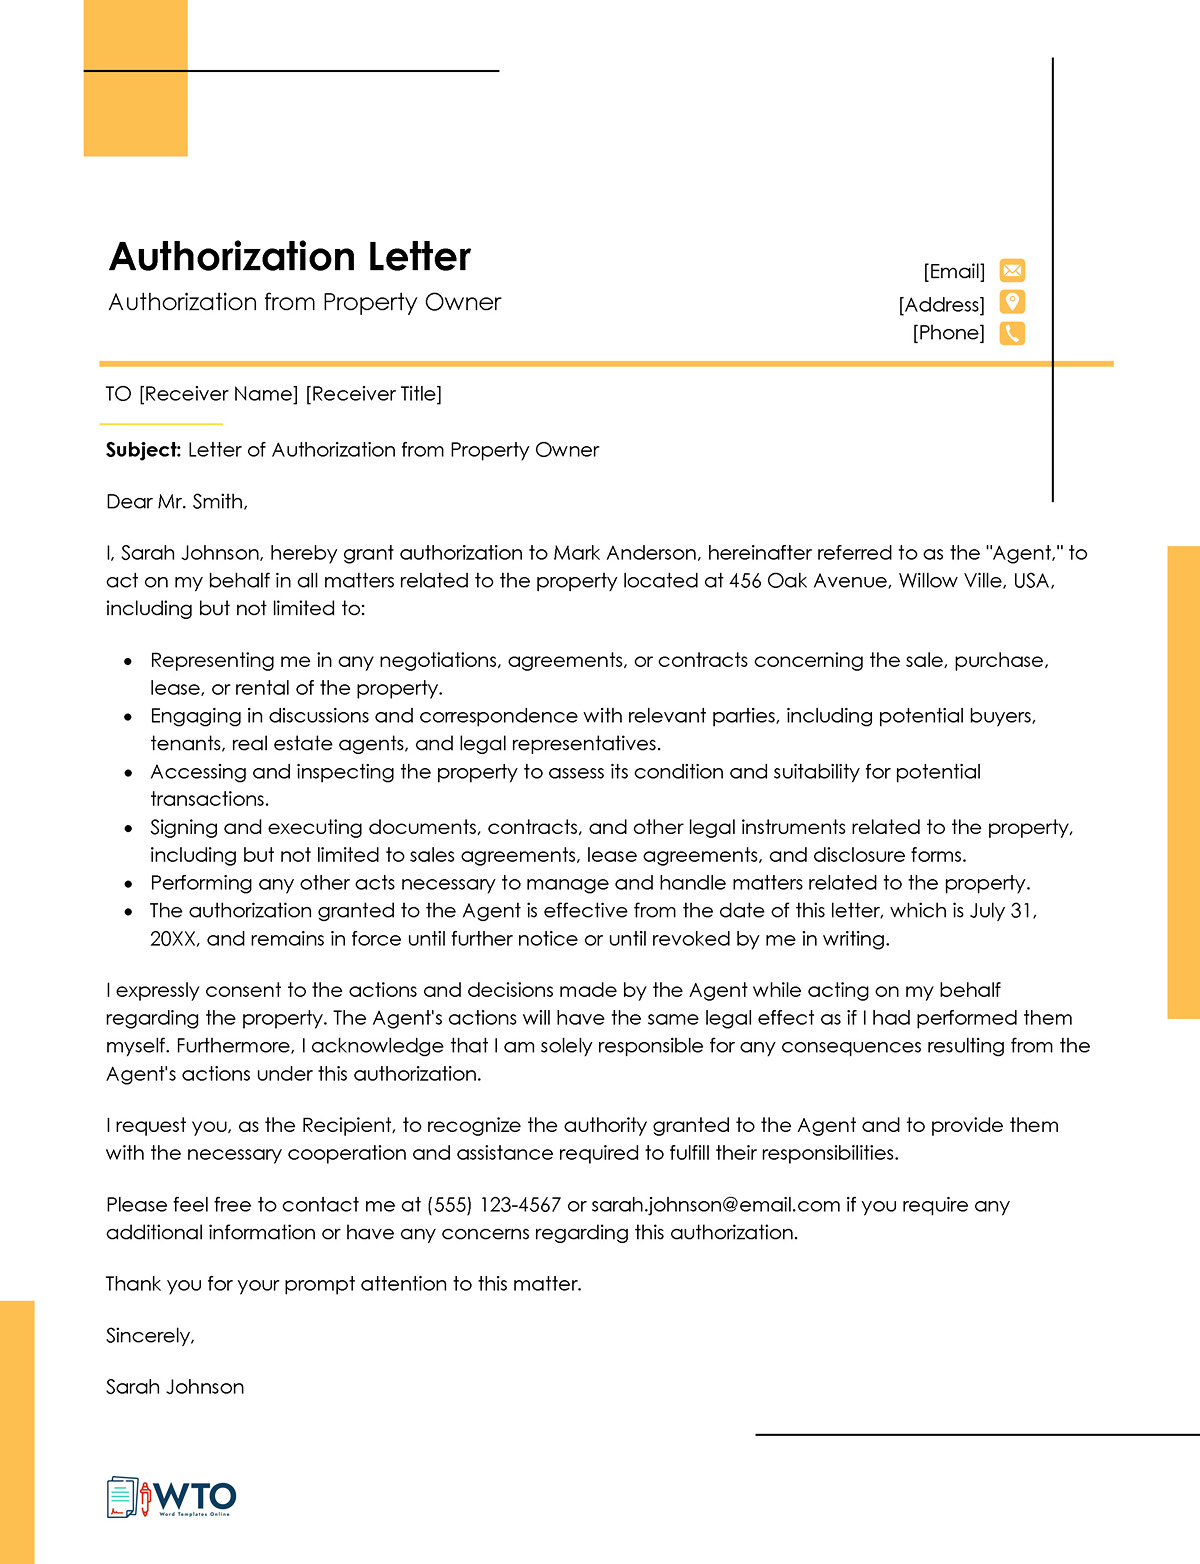 Sample Letter of Authorization from Property Owner-Editable